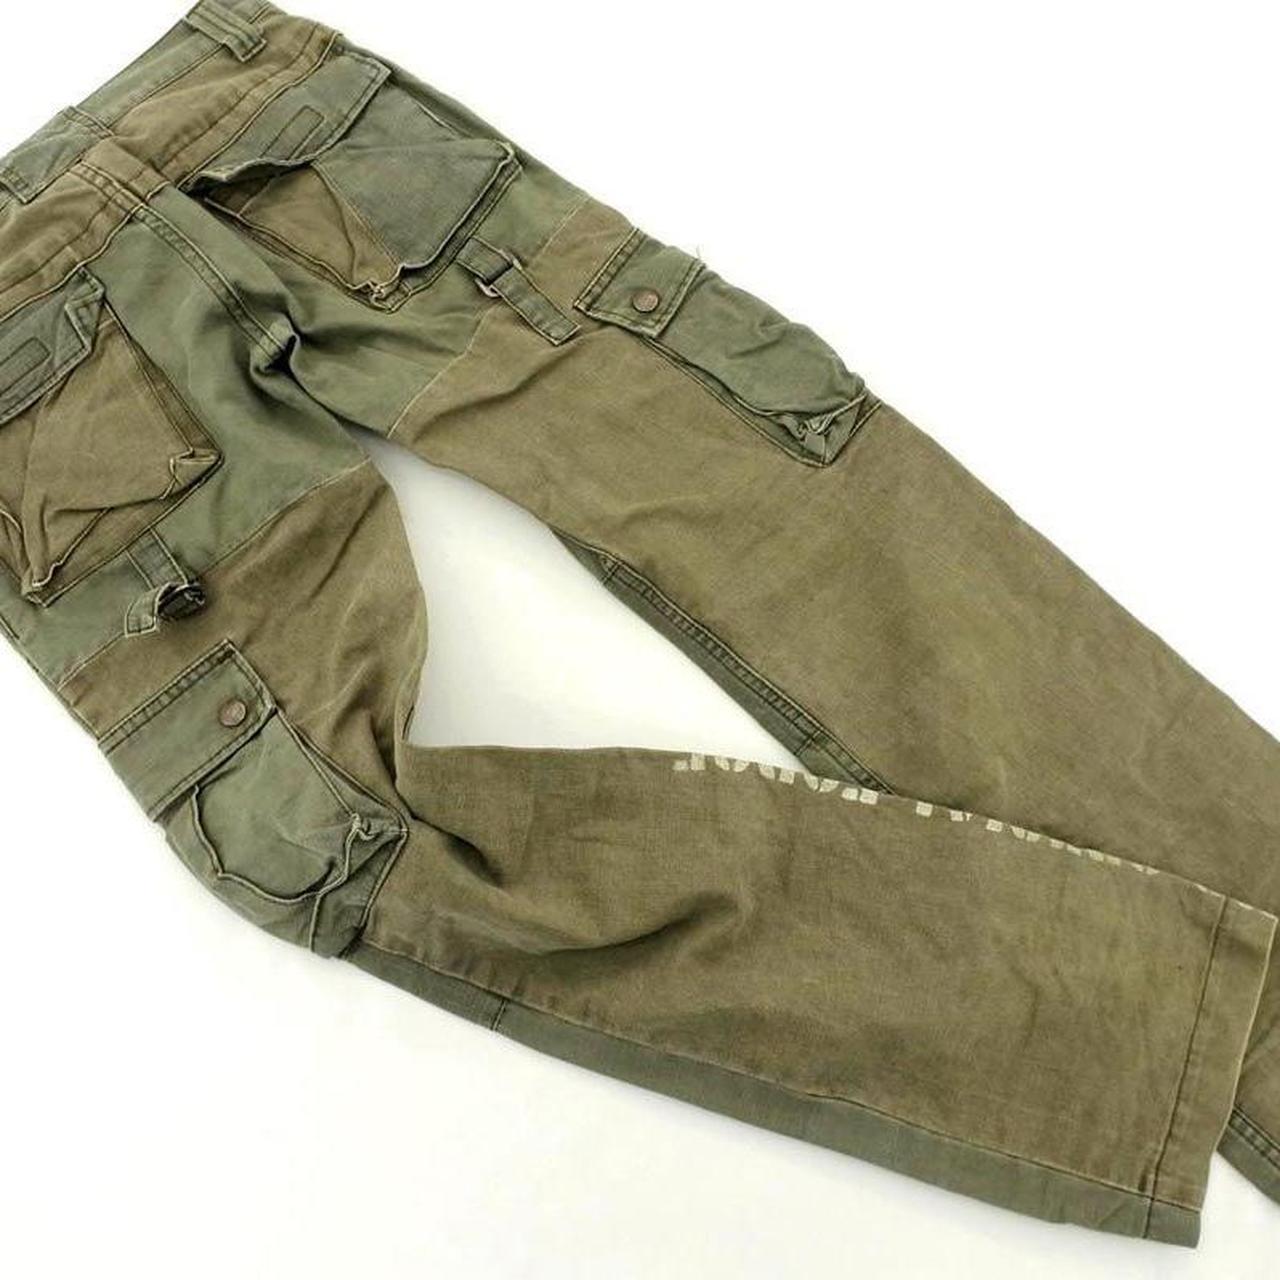 Hysteric Glamour Men's Khaki and Green Jeans (2)